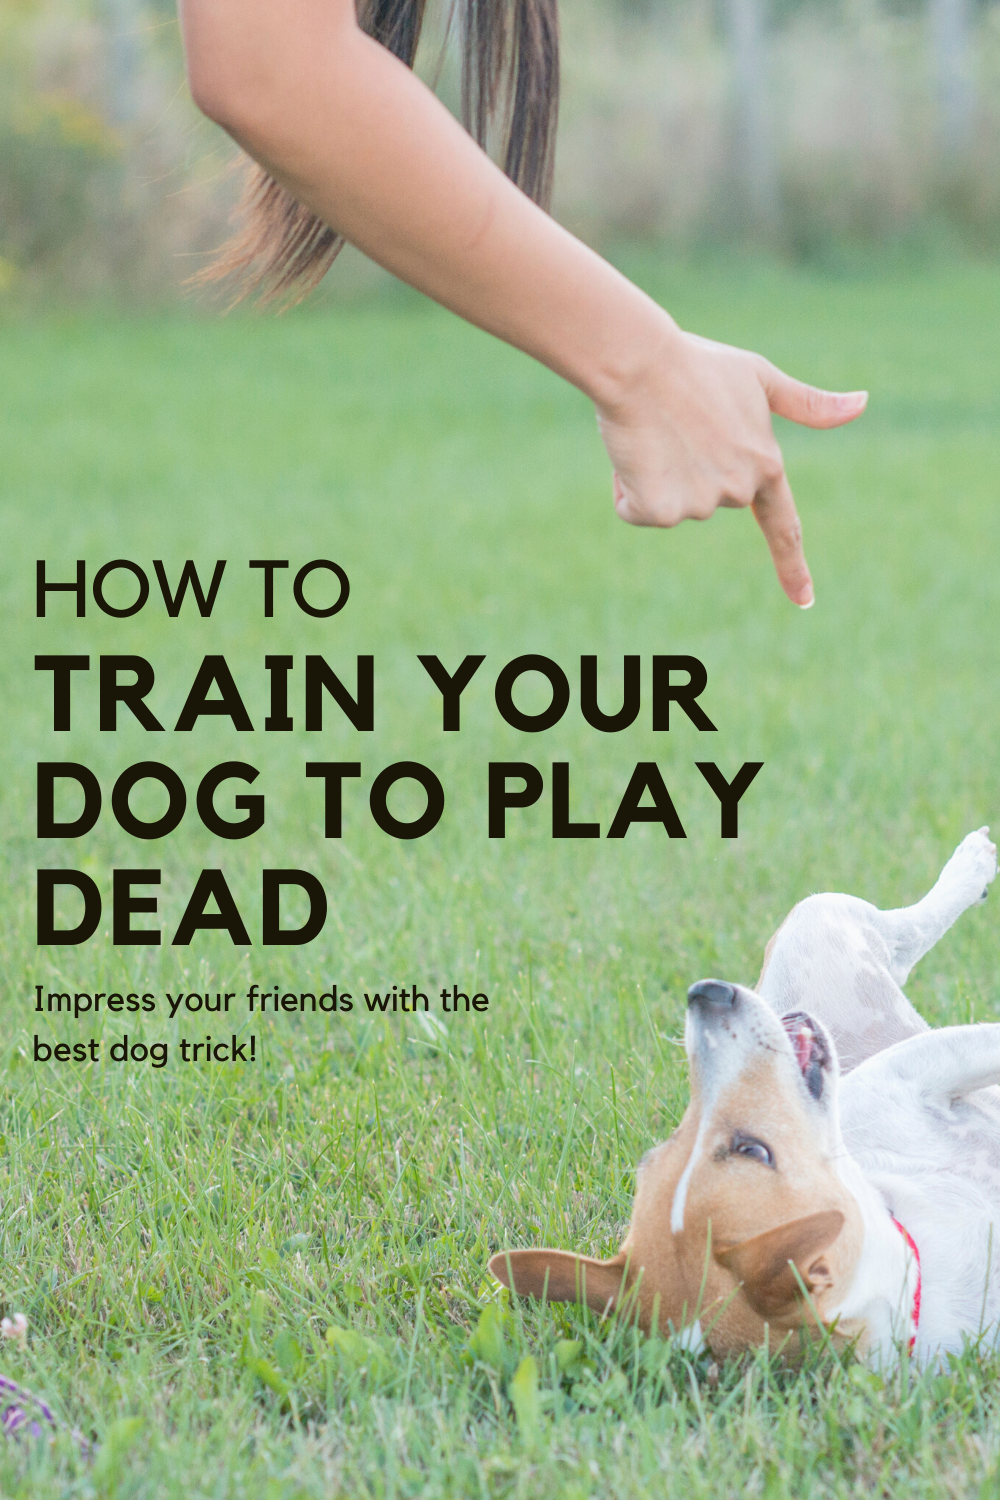 How to train your dog to play dead